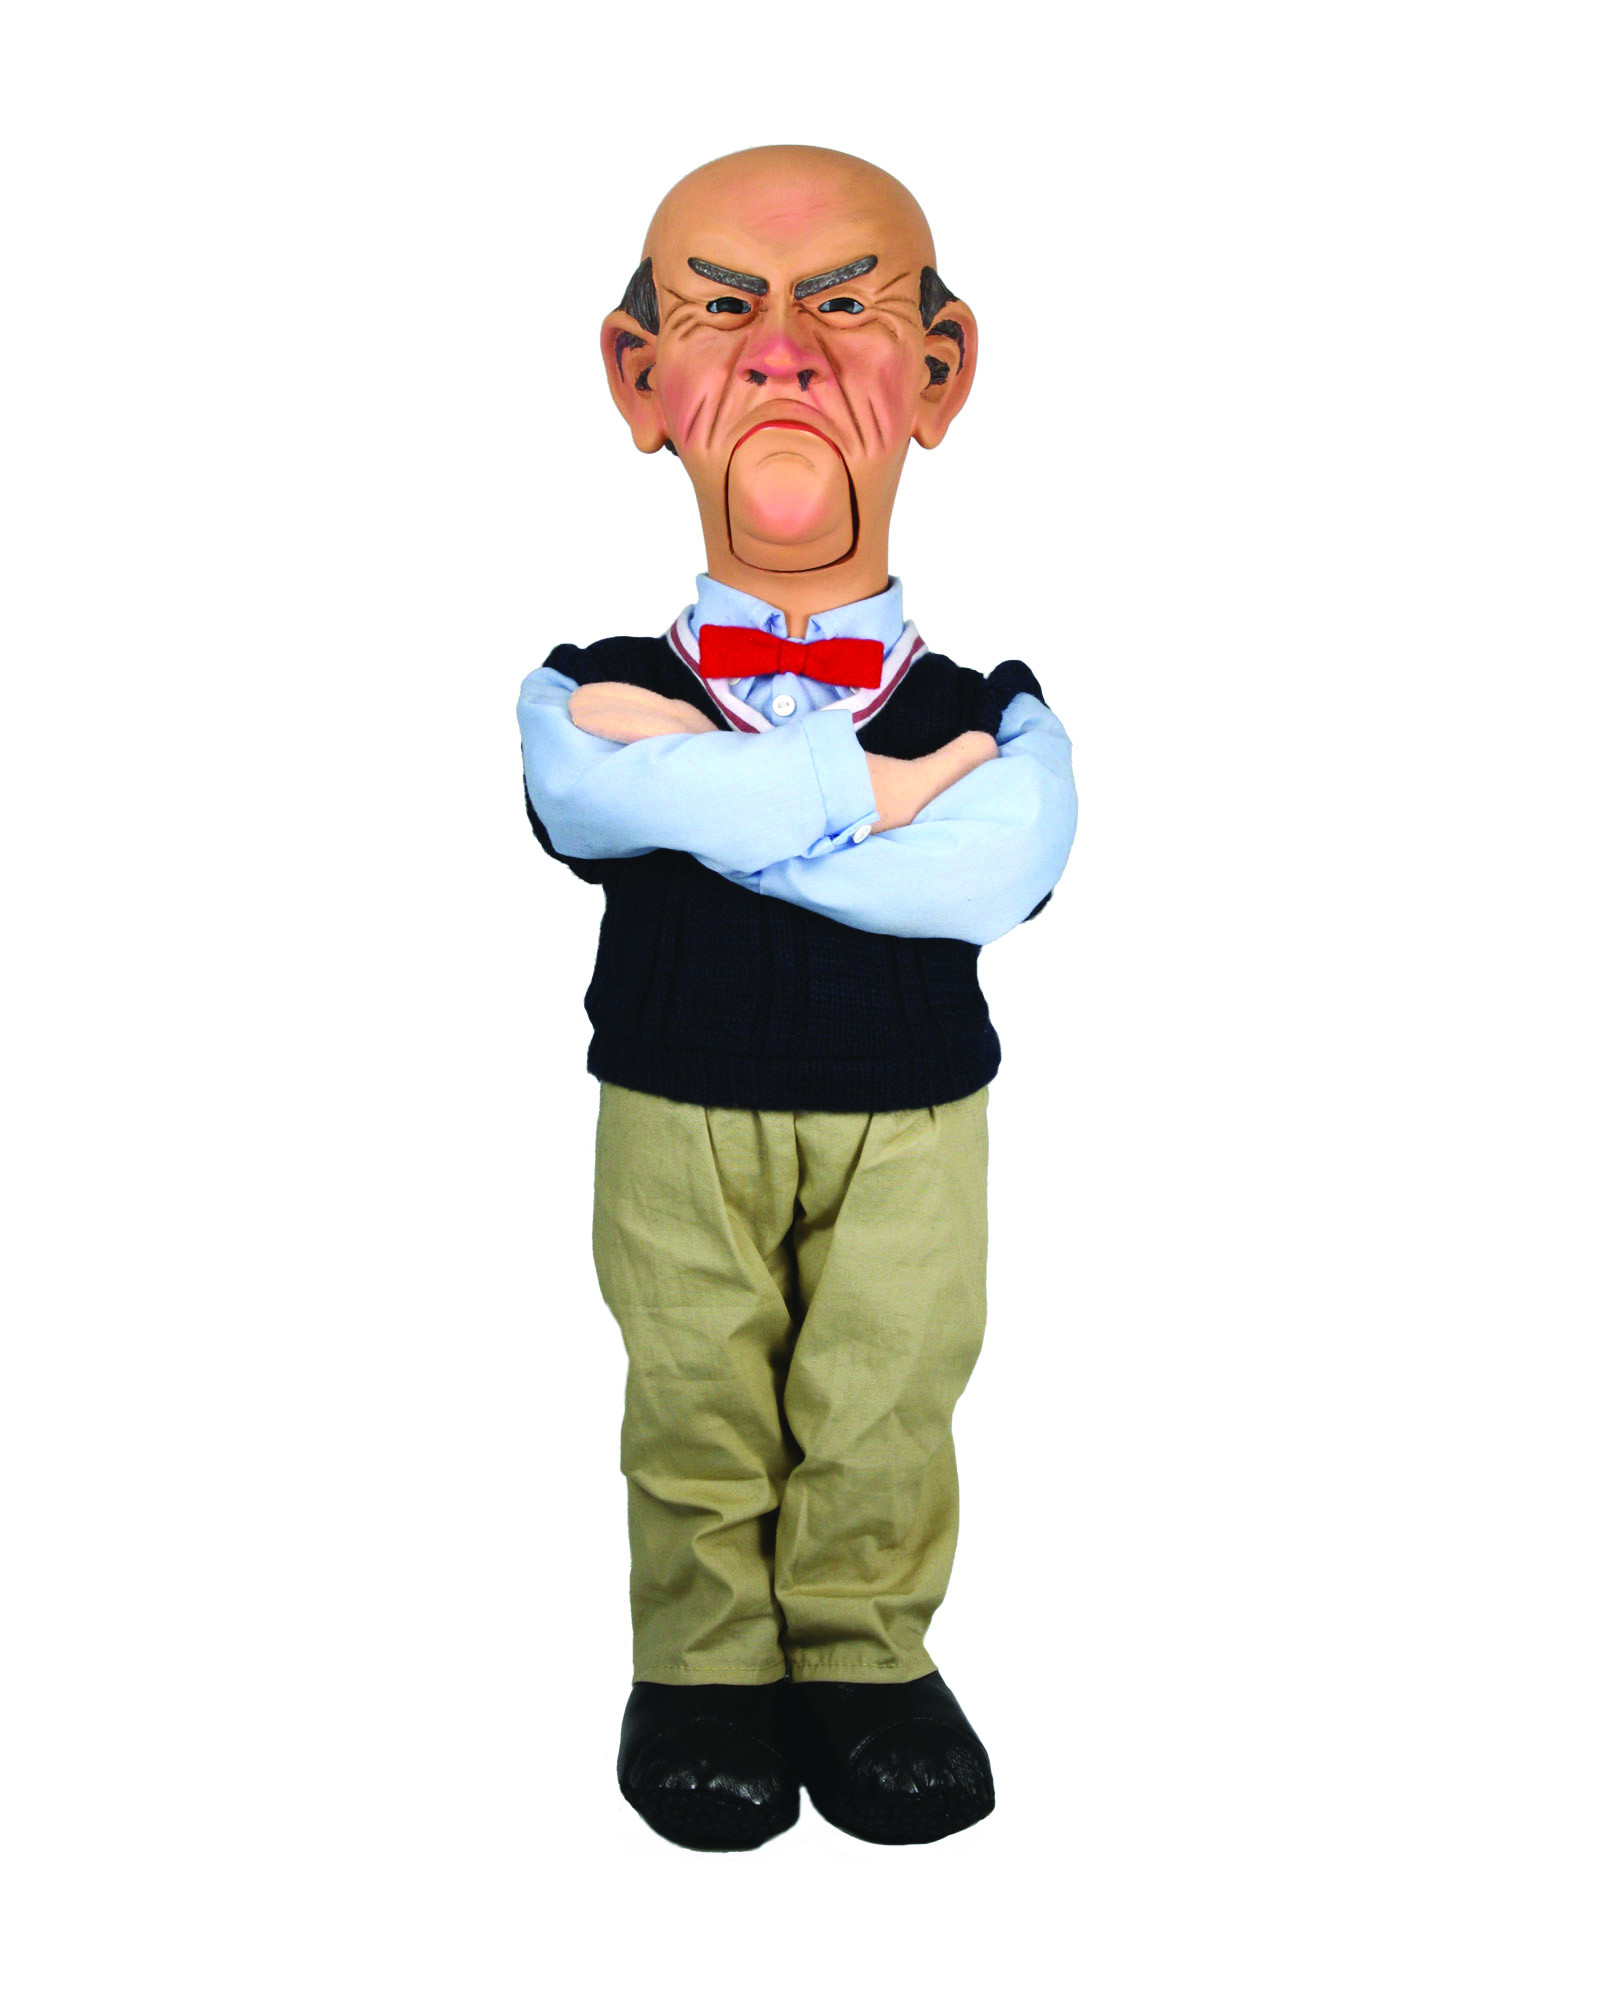 Jeff Dunham is the top-grossing stand-up comedian and ventriloquist working...